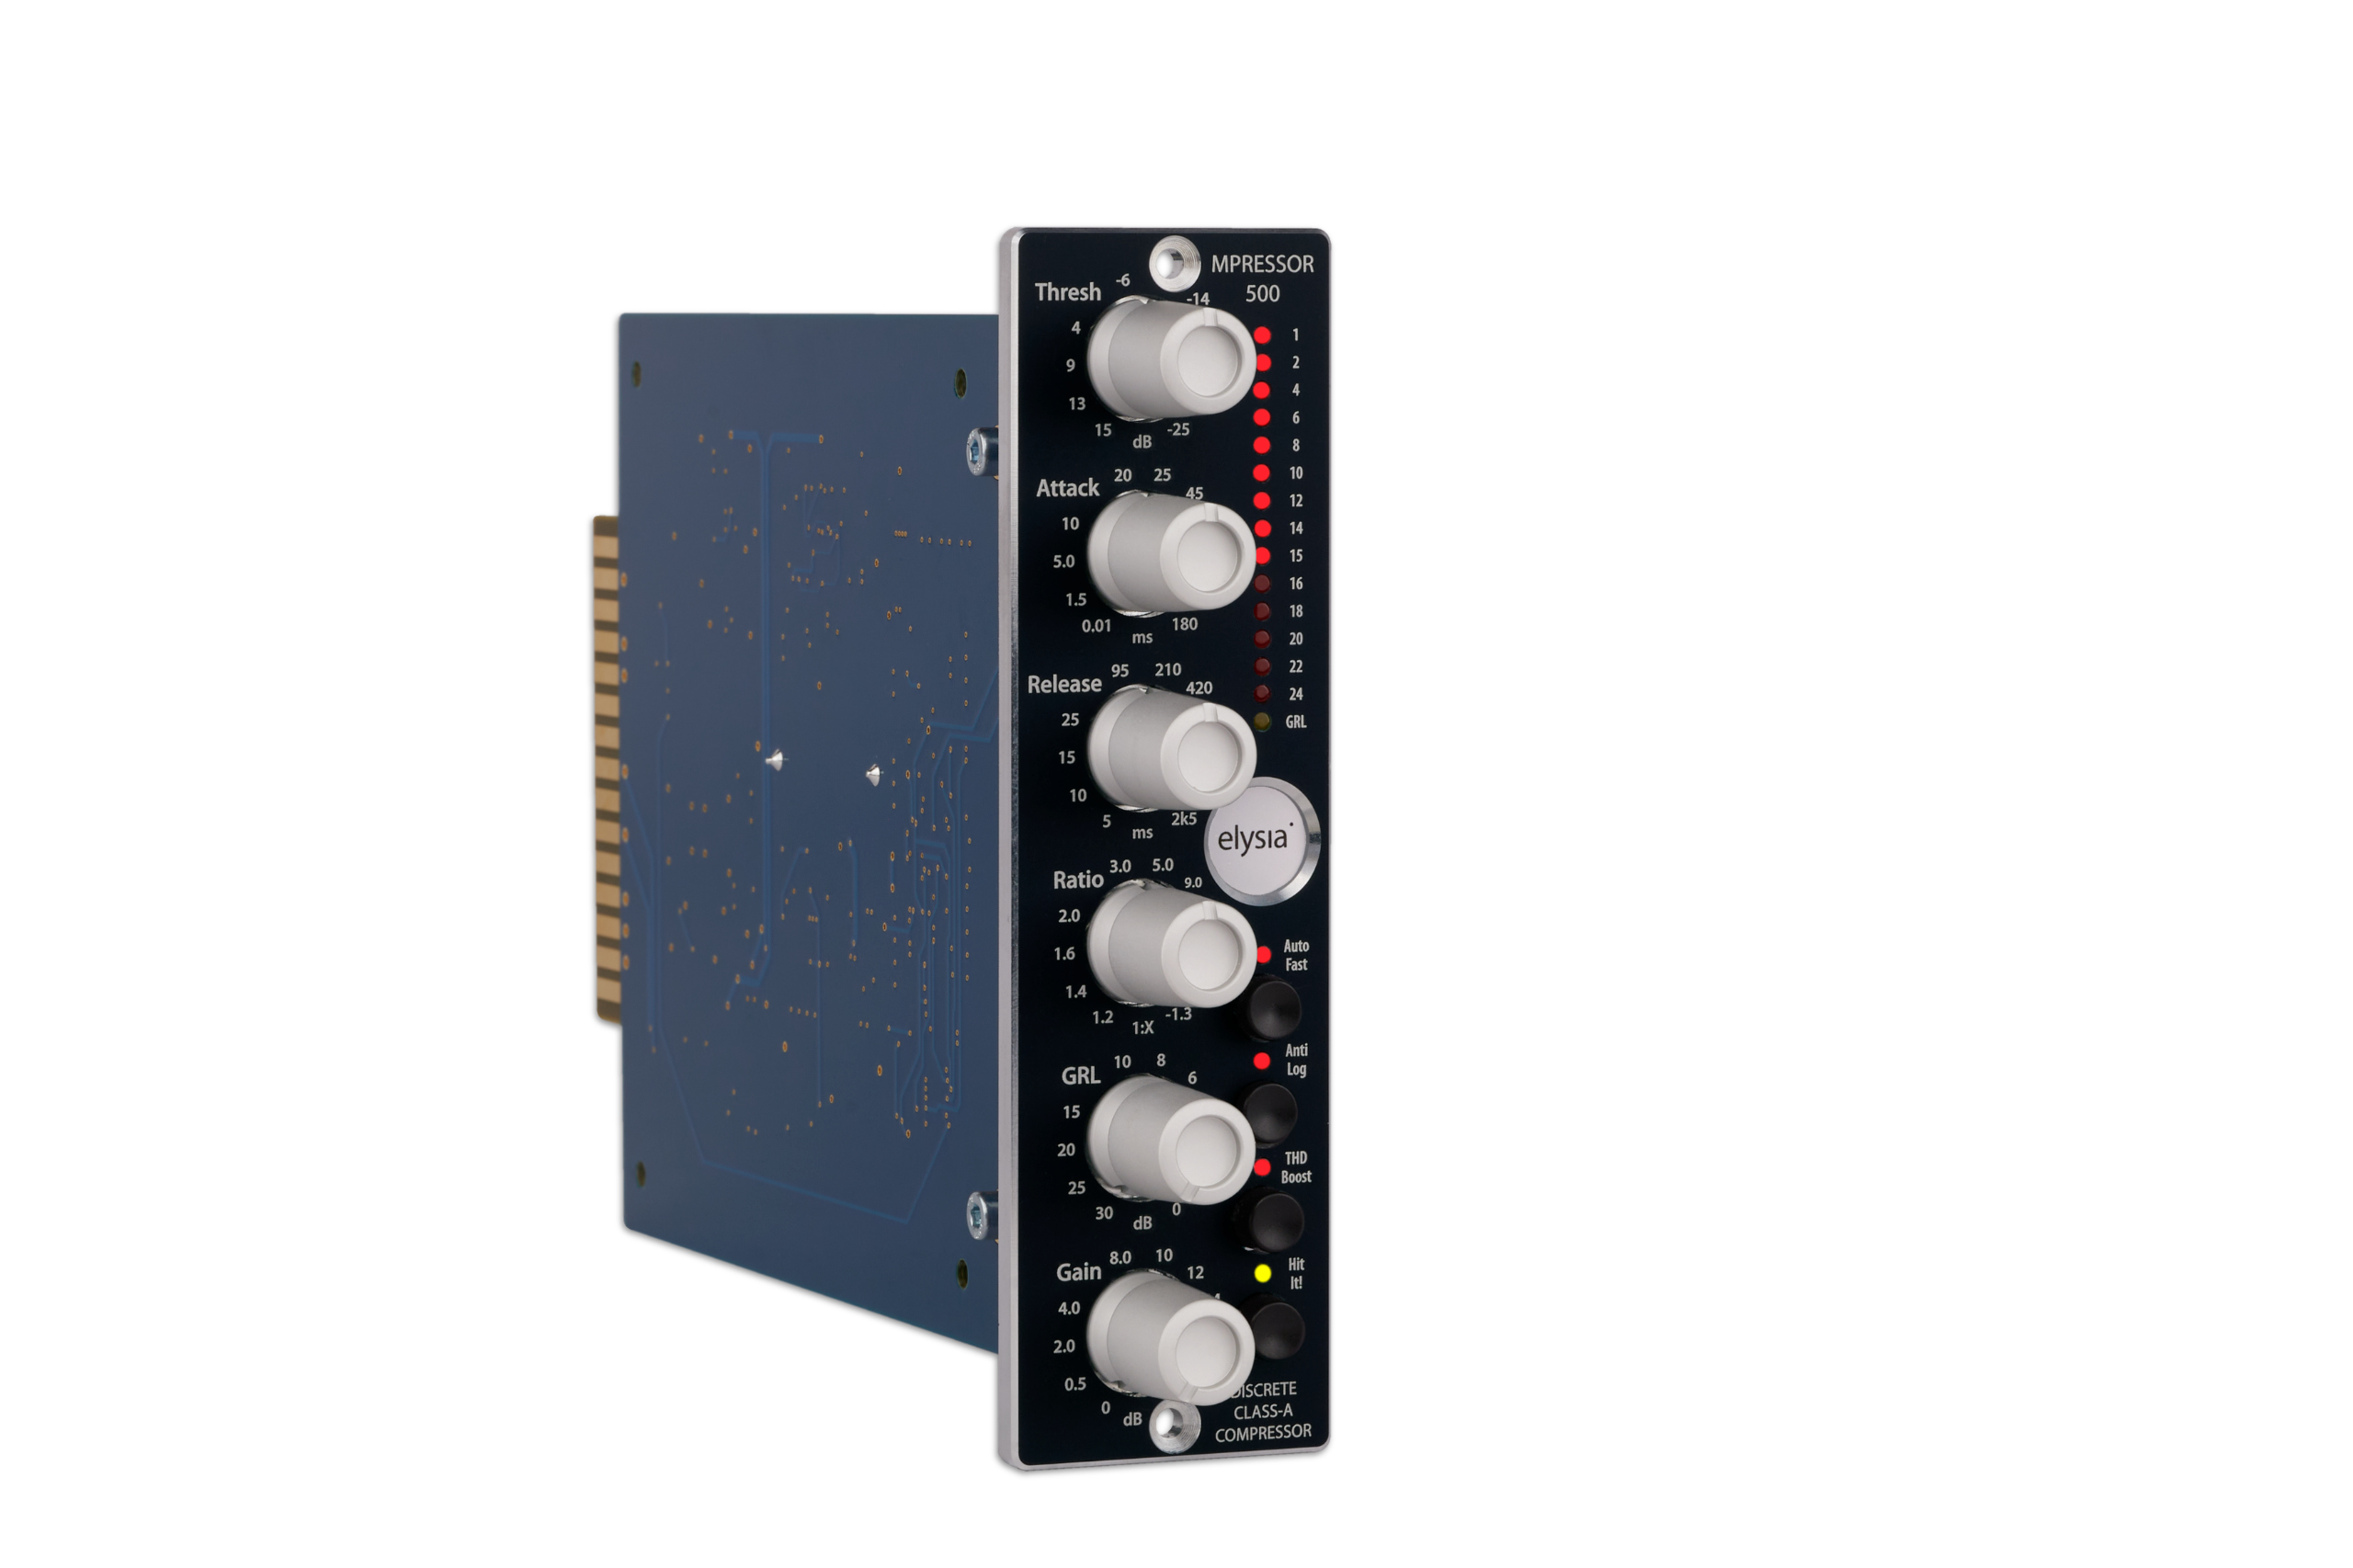 The elysia skulpter 500 is an analog high-end preamp with balanced DI input for recording mixing audio.